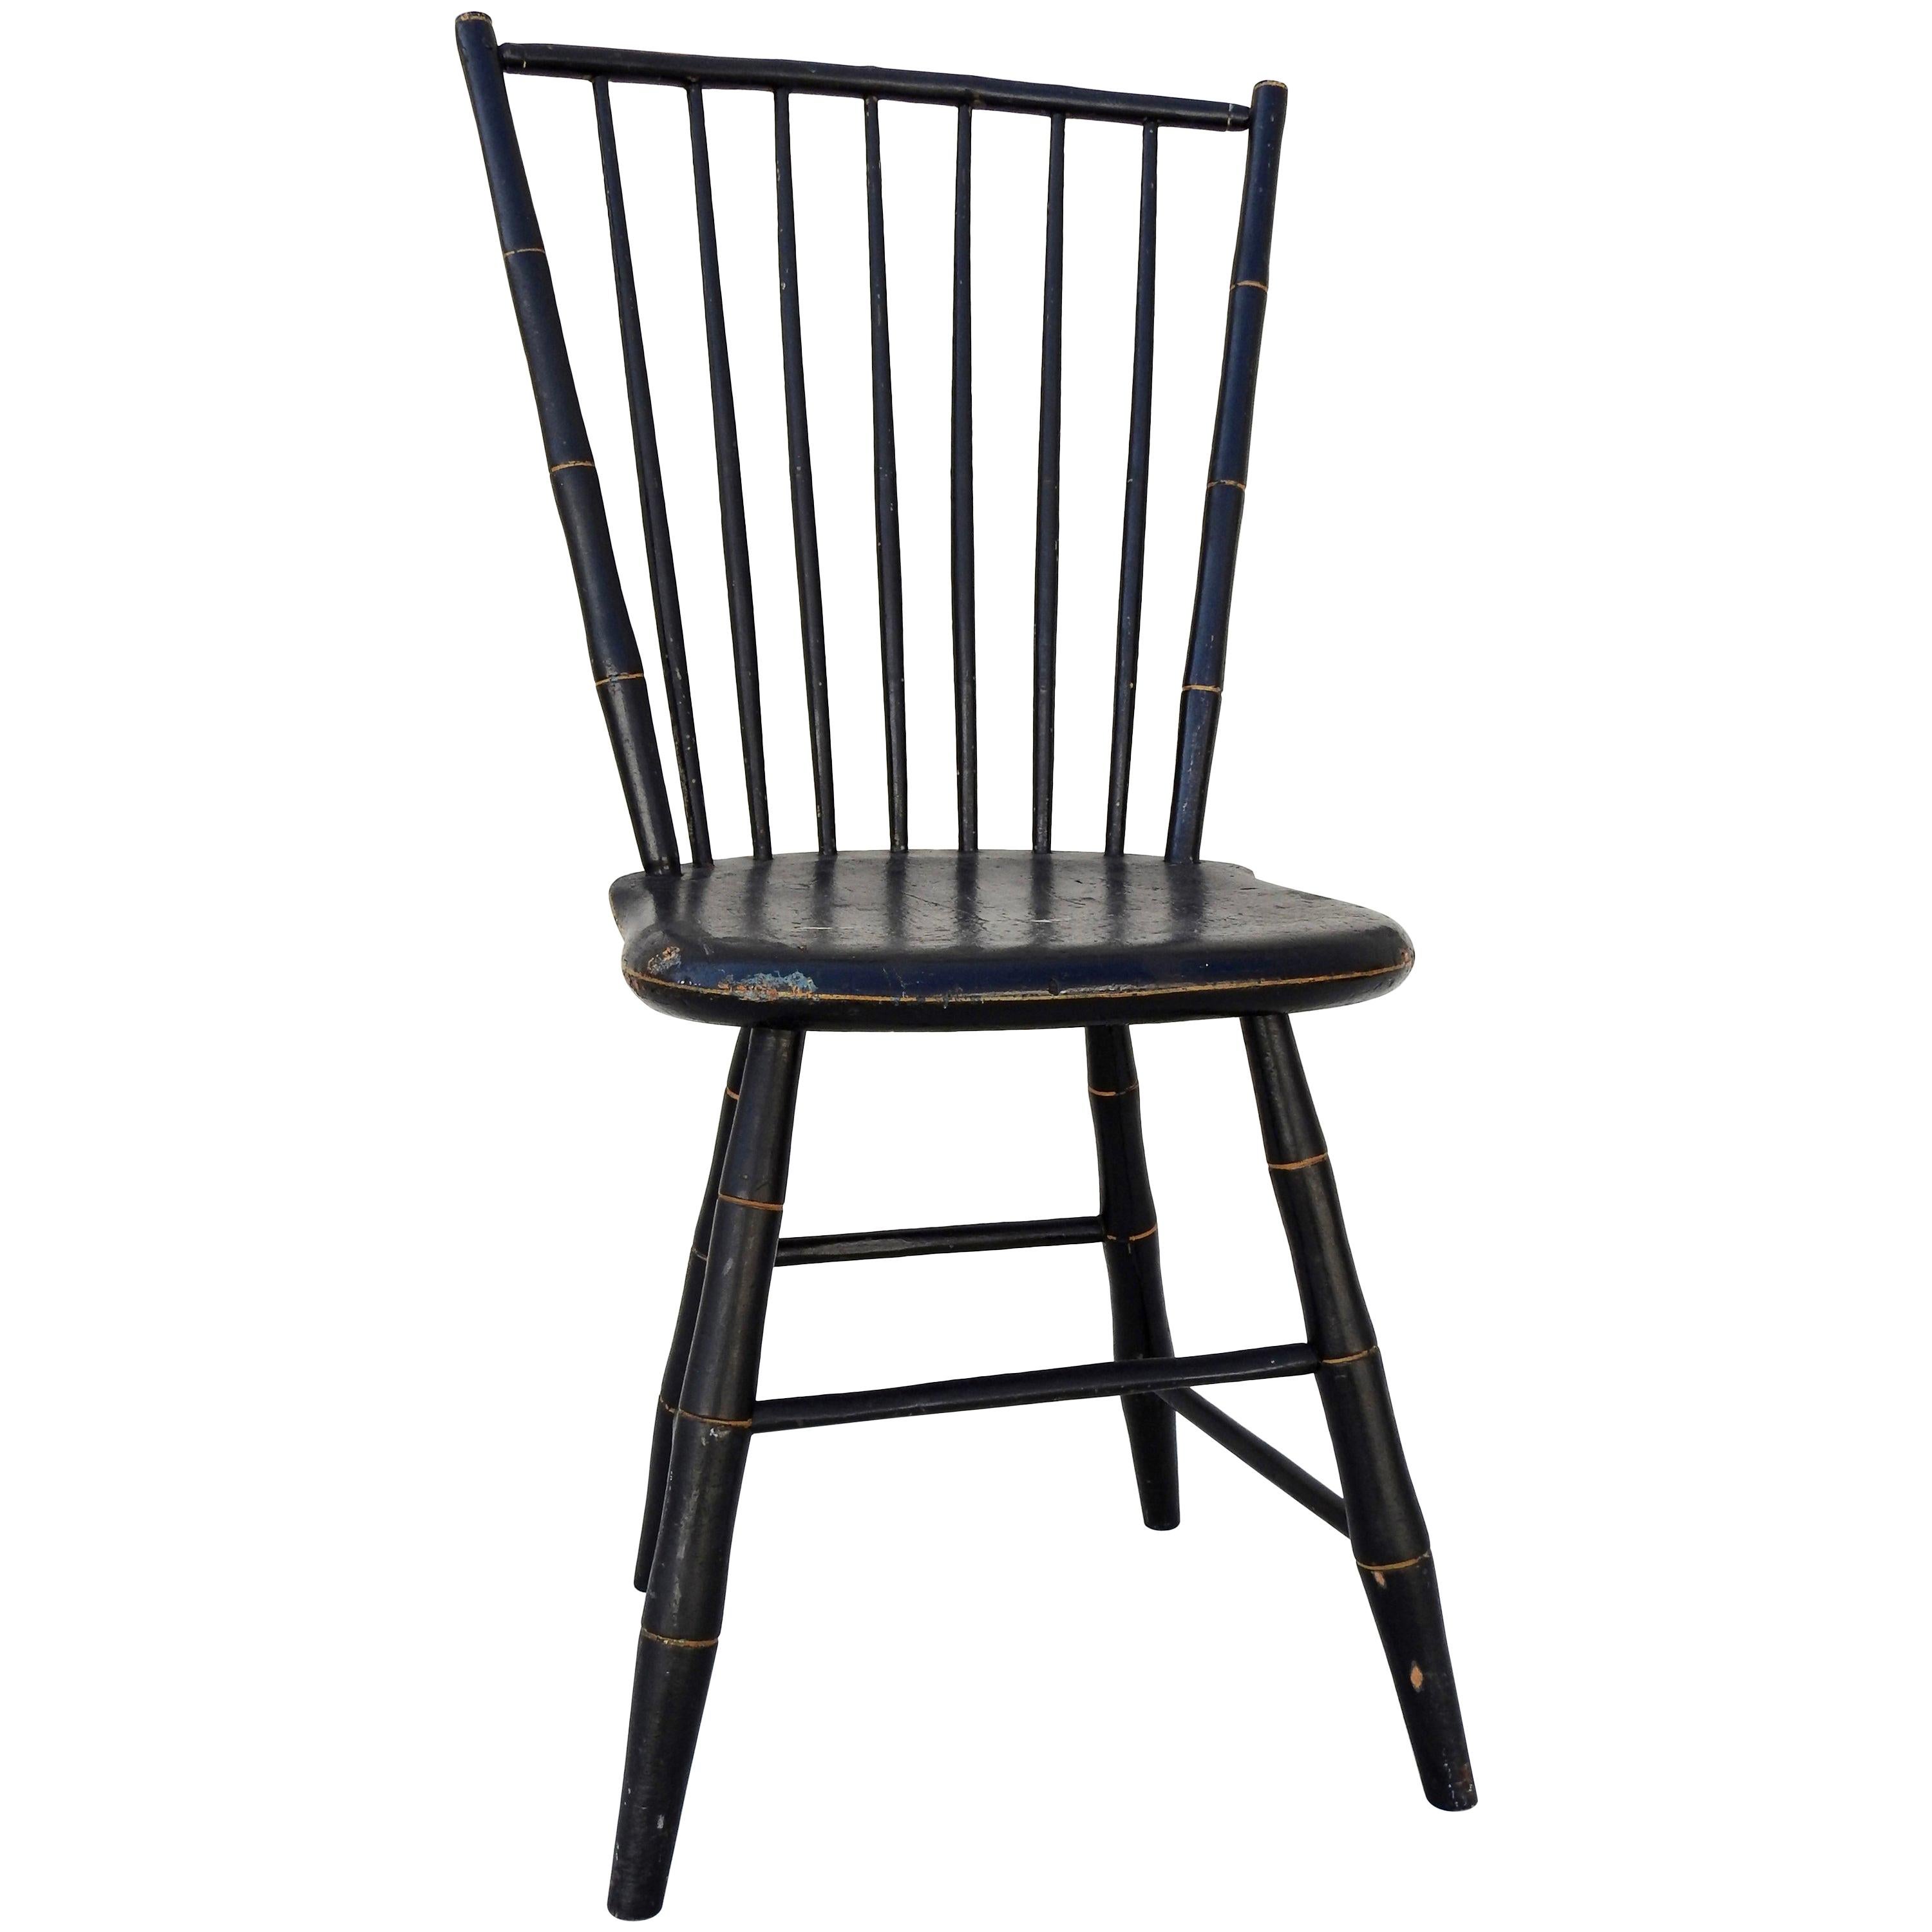 Windsor Chair Black and Gold Painted by William Wilt